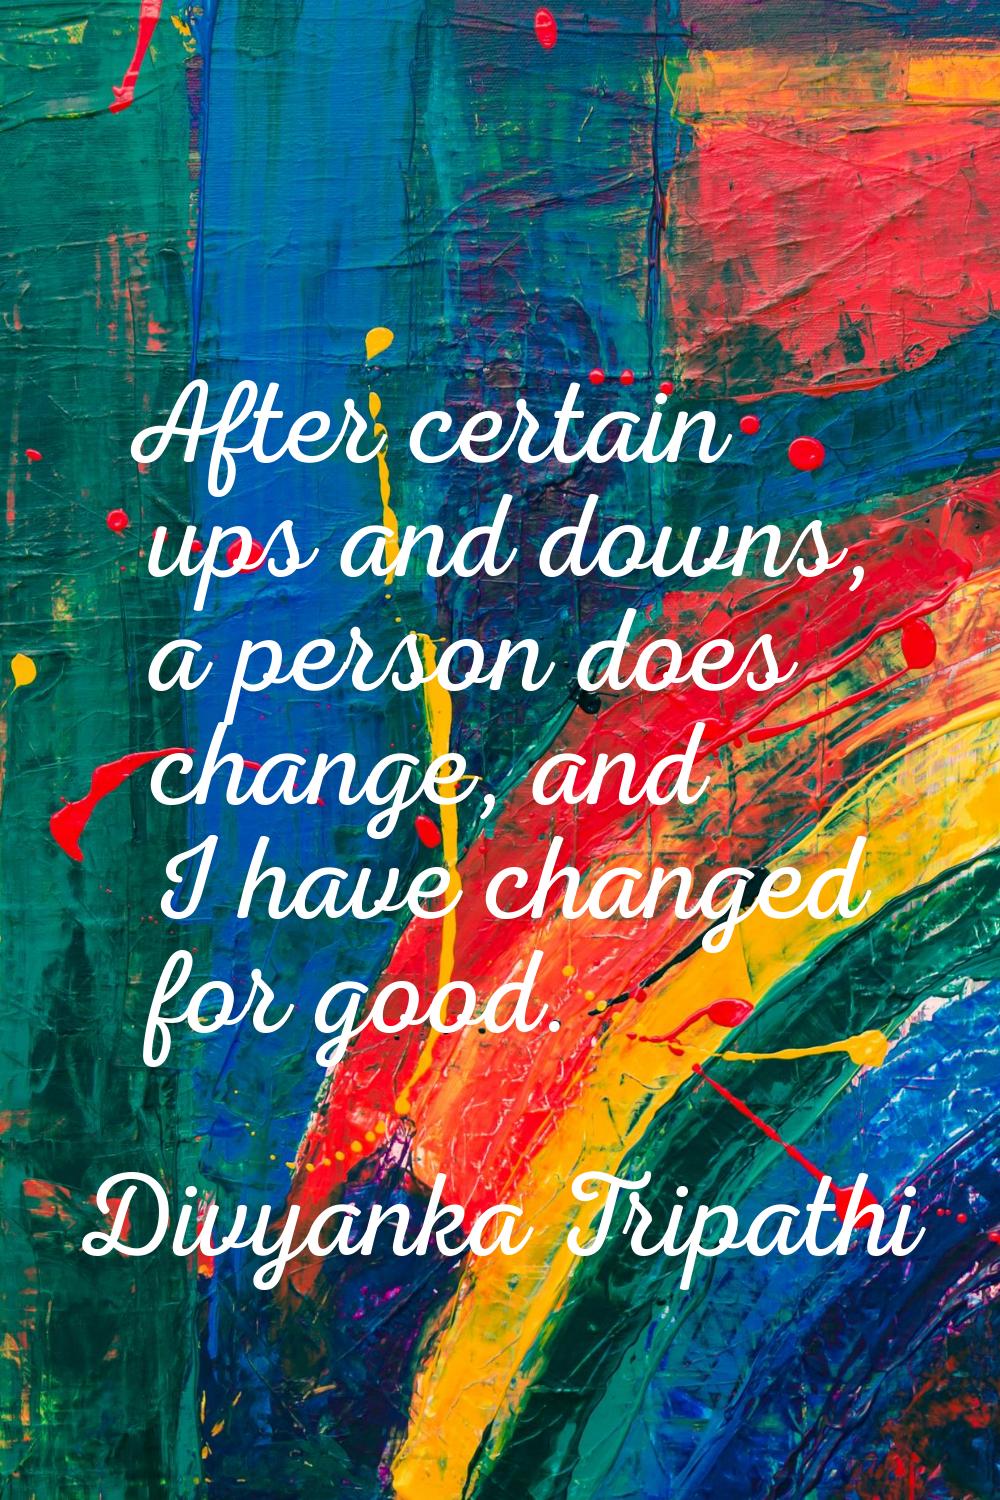 After certain ups and downs, a person does change, and I have changed for good.